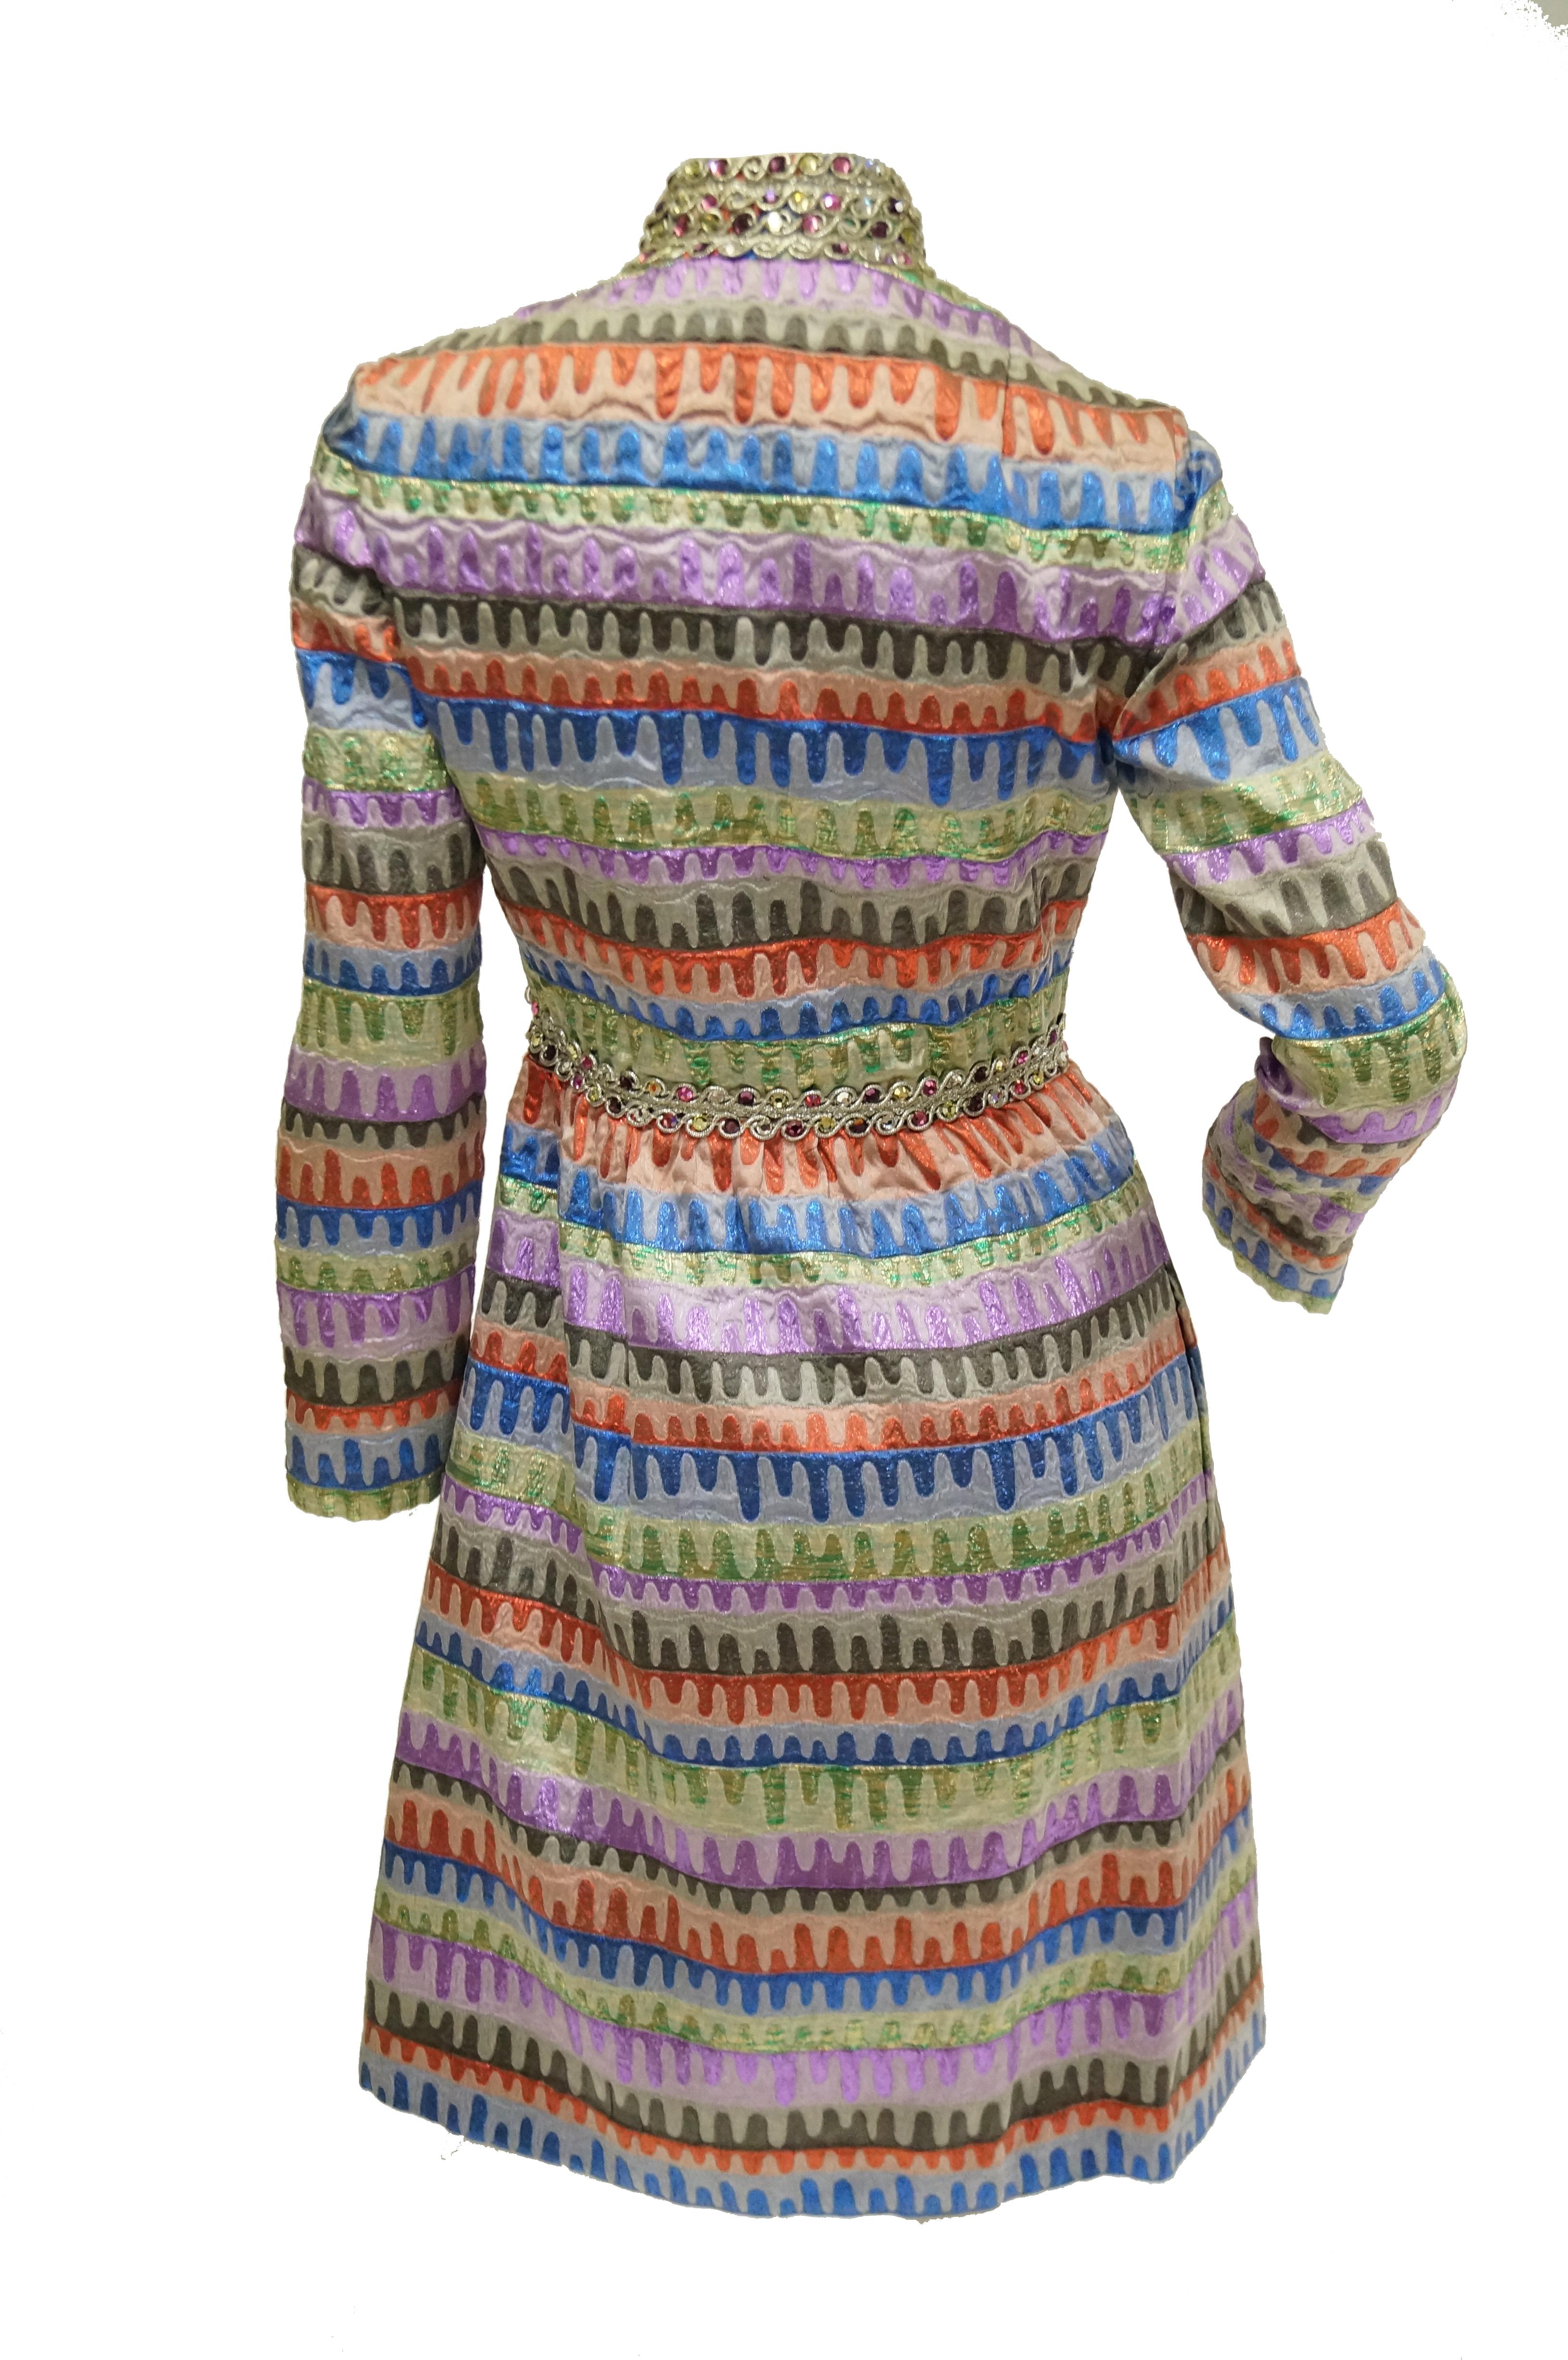 Simply stunning multicolor party dress by Oscar! This gloriously 60s piece features a knee - length hem, A - line silhouette, long sleeves, and mandarin collar. The dress is composed of an amazing brocade fabric with red, blue, green, purple, and